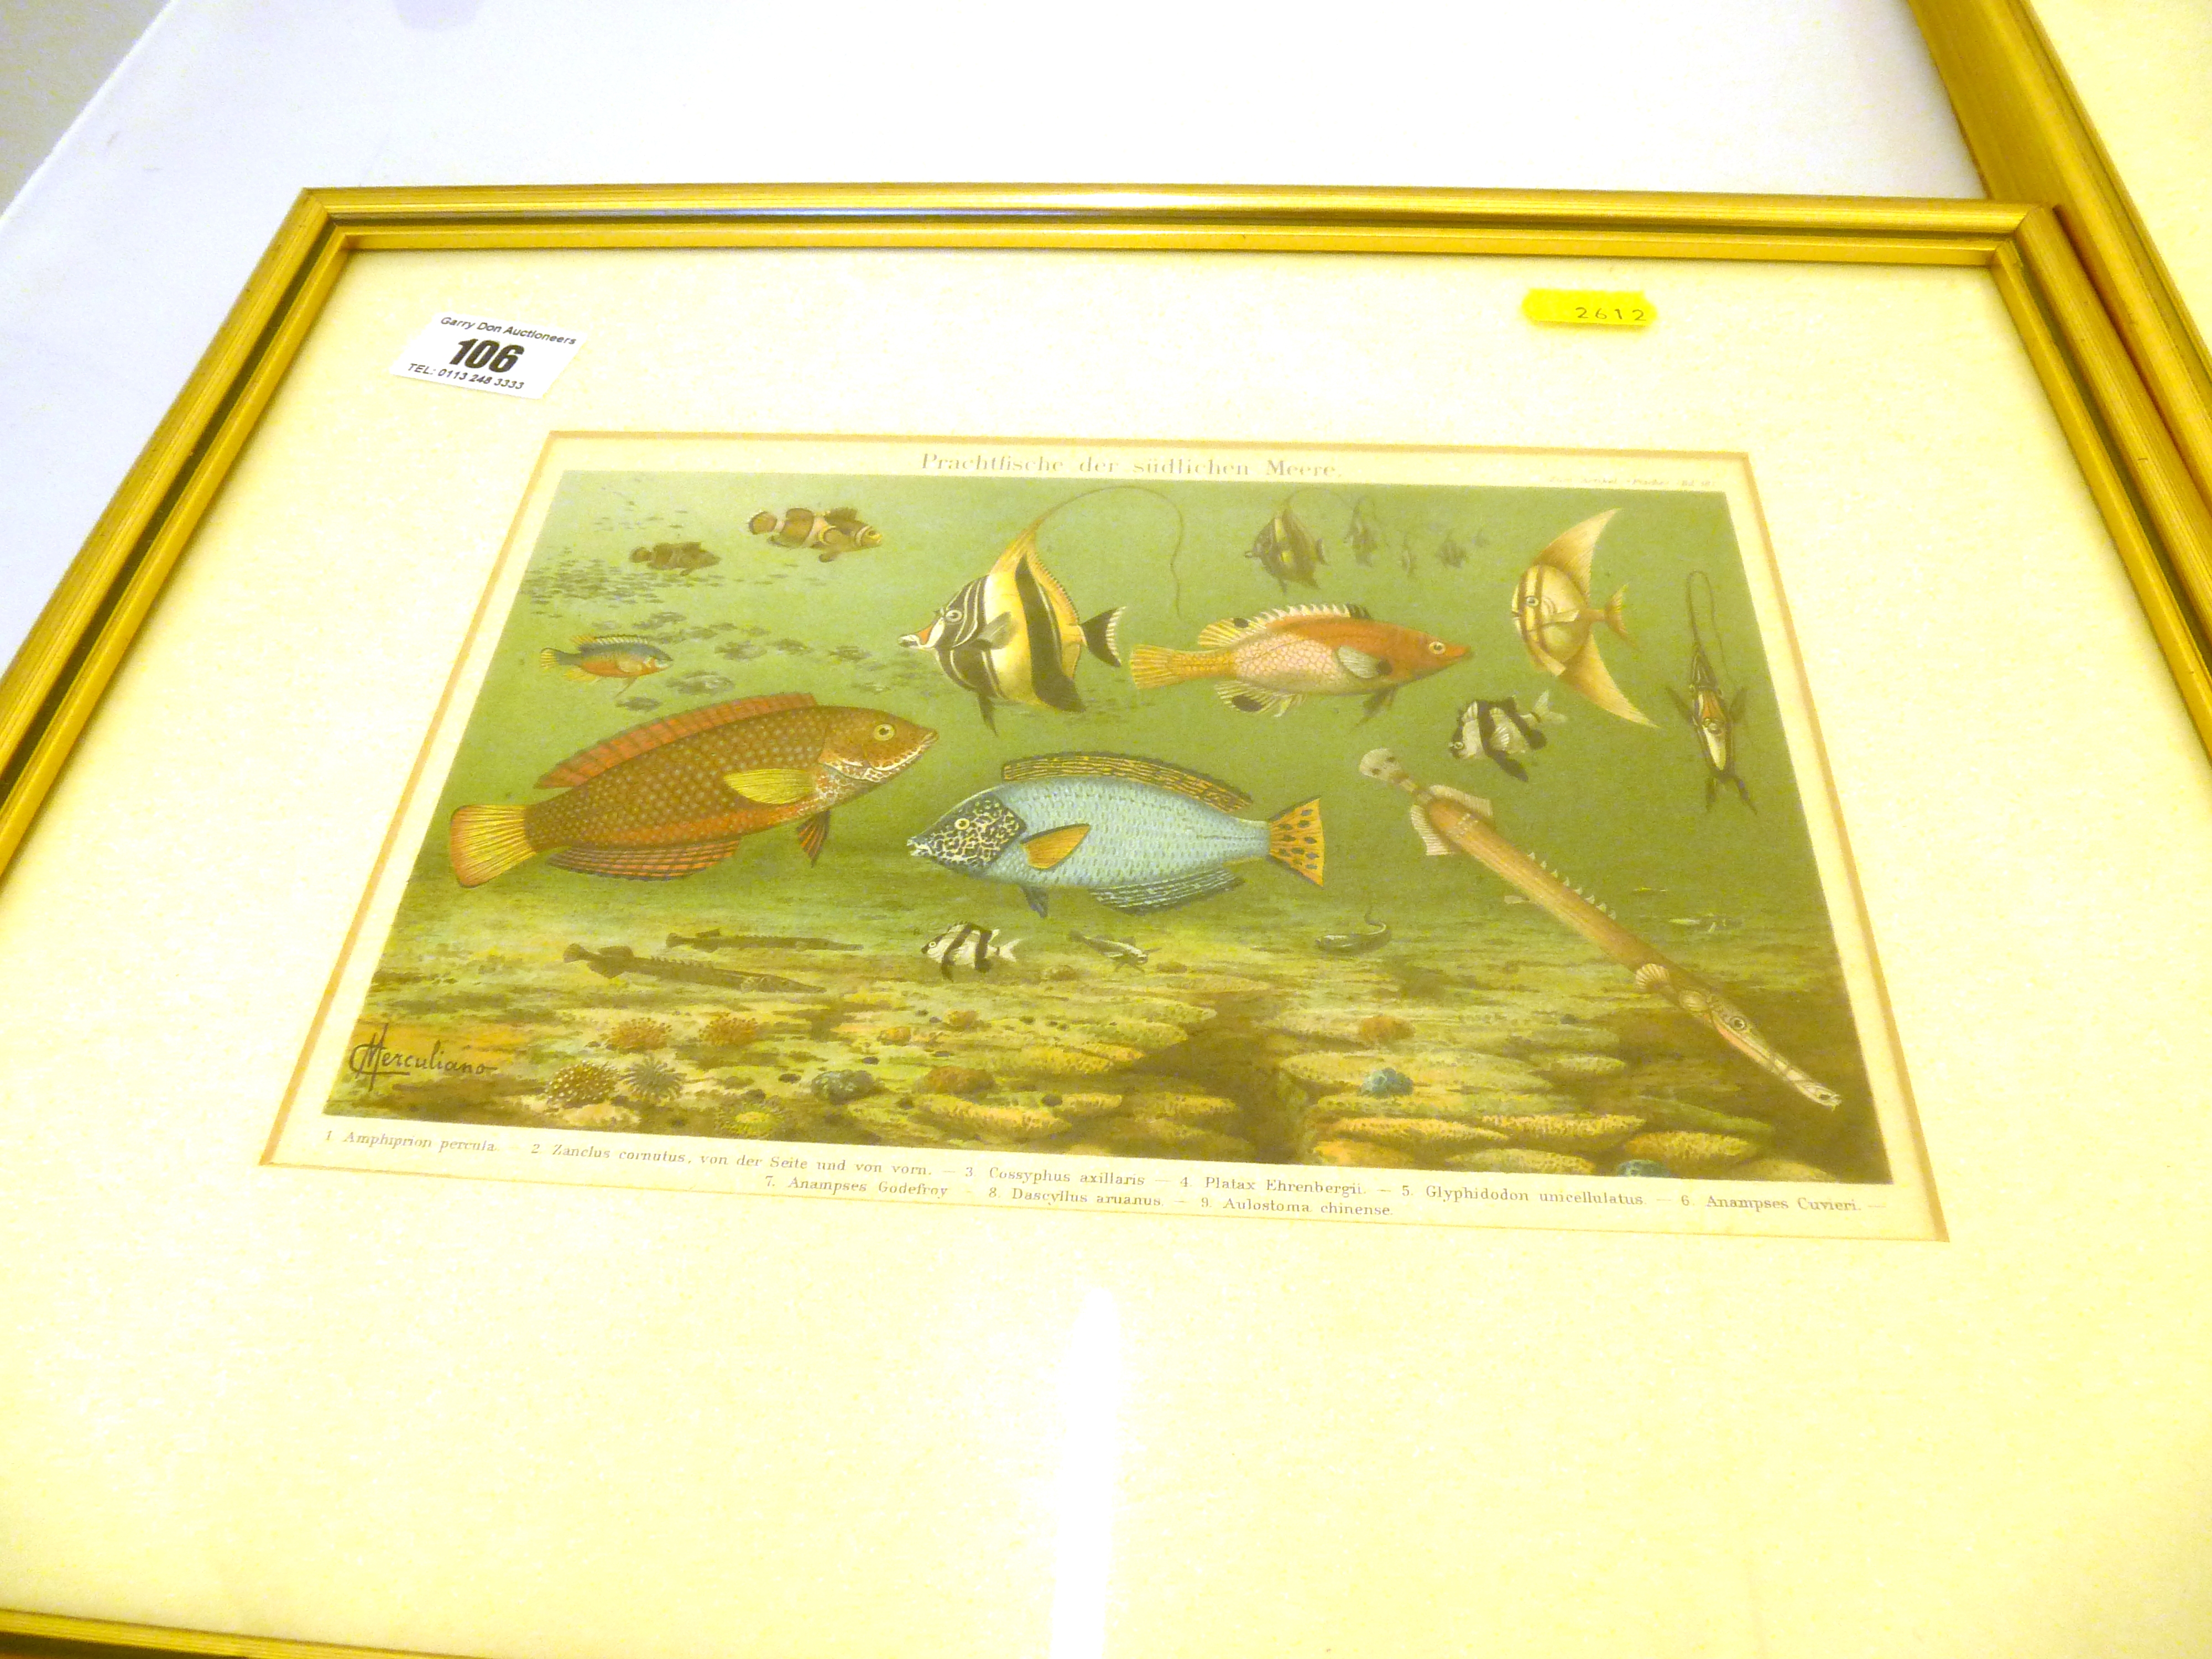 3 FRAMED 1896 GERMAN CHROMO LITHOGRAPHS DEPICTING MARINE LIFE APPROX 5.75" X 8.25" - Image 4 of 4